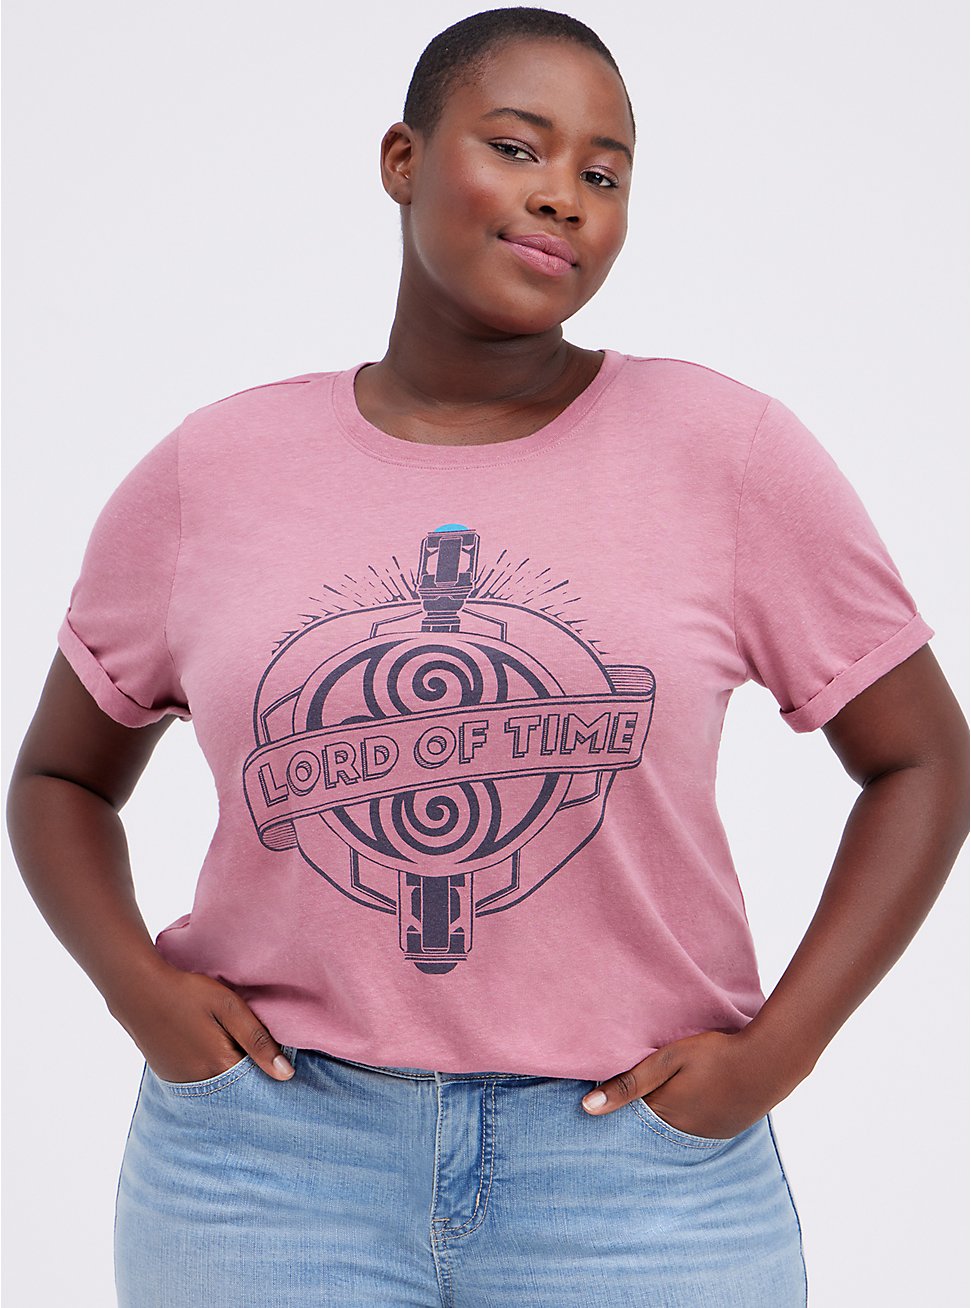 Plus Size Top - Her Universe Dr. Who Lord Of Time Pink, MESA ROSA, hi-res